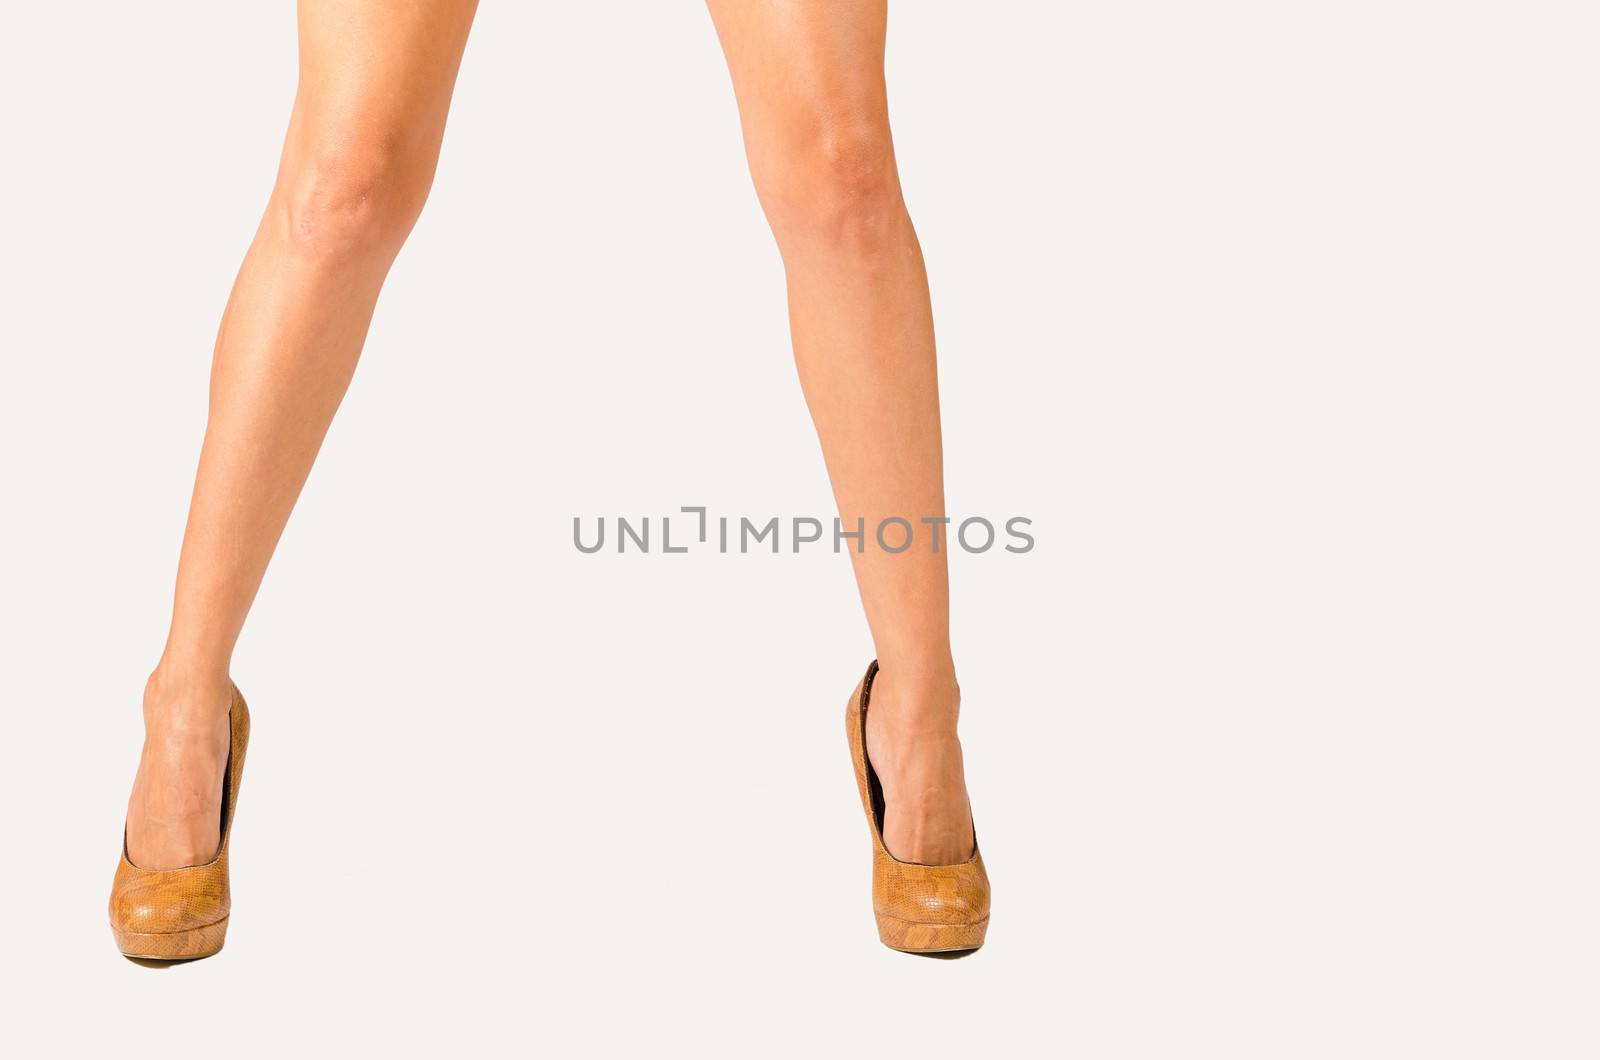 Spread and firmly standing female legs in a studio shot